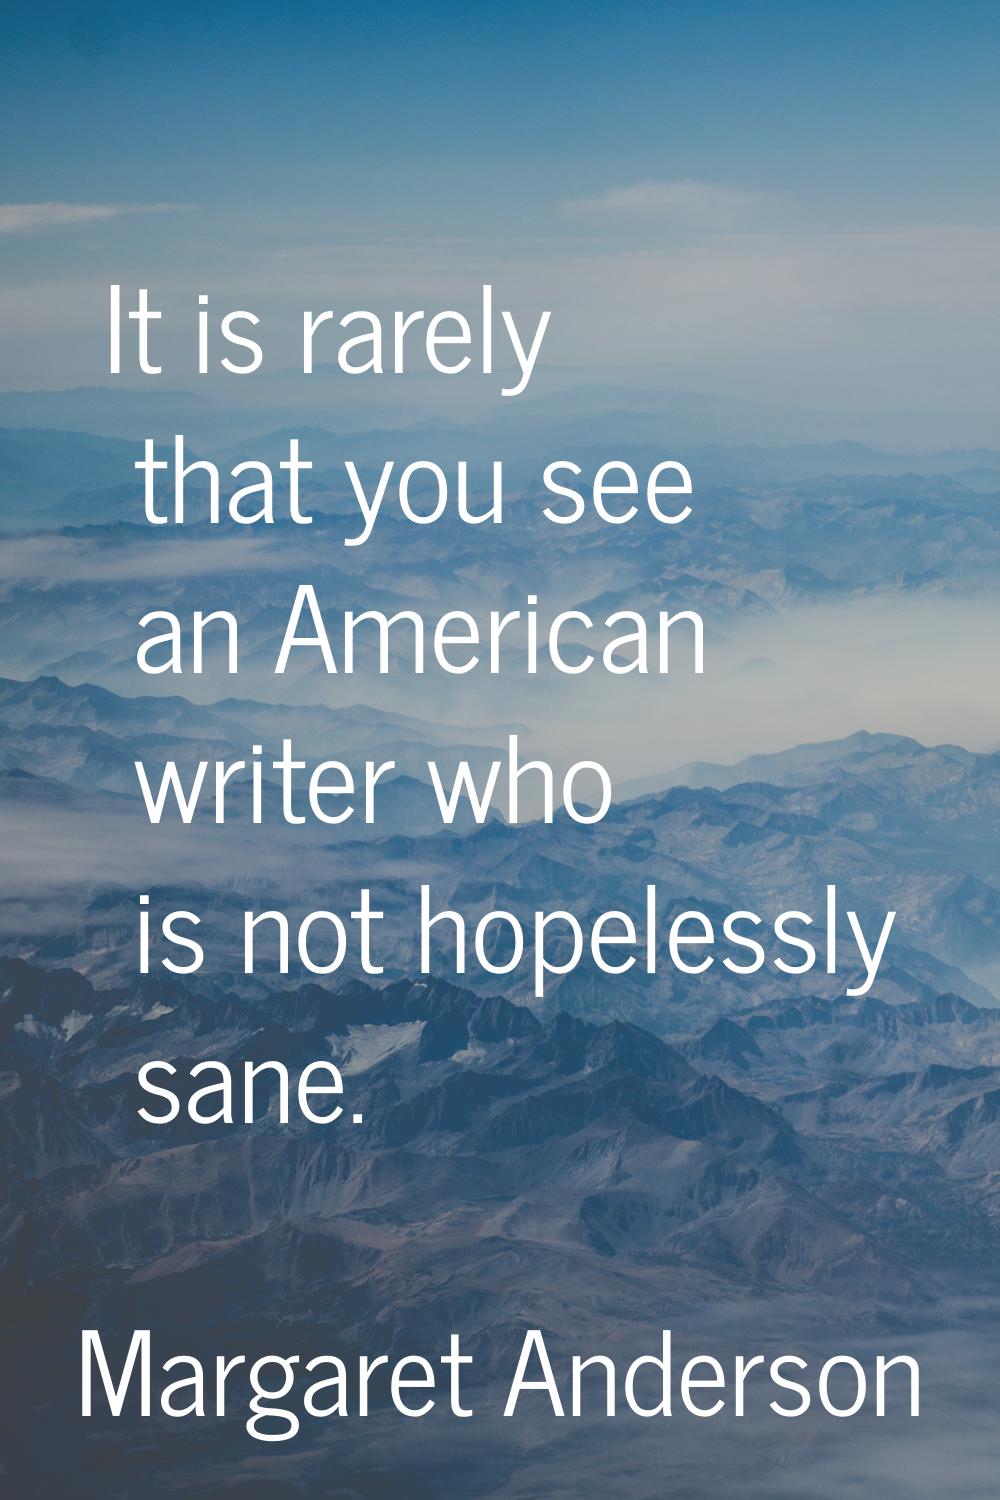 It is rarely that you see an American writer who is not hopelessly sane.